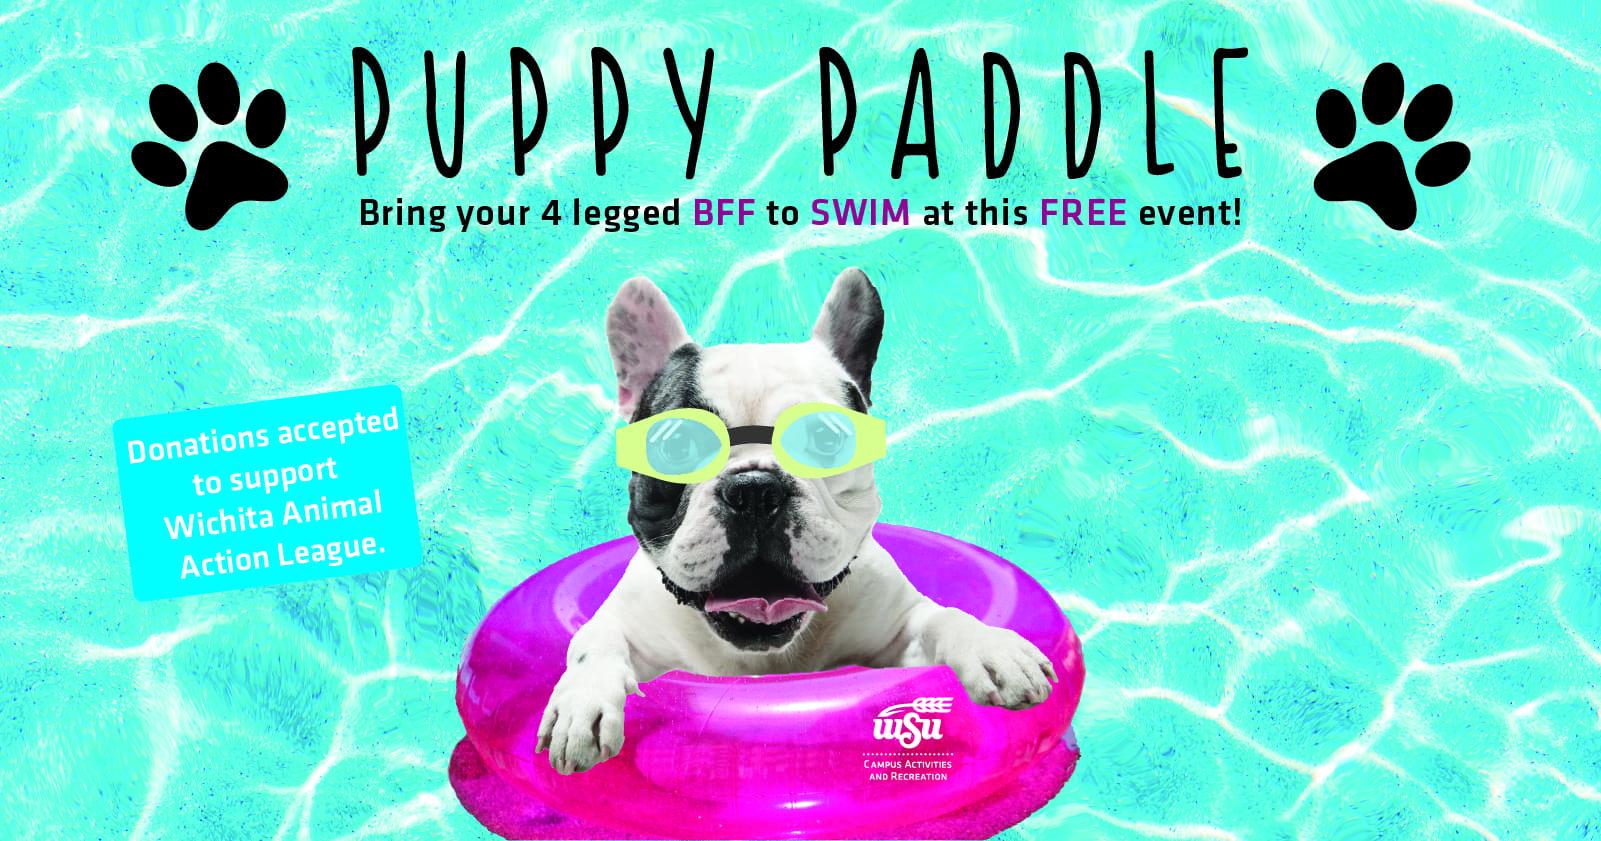 Puppy Paddle. Bring your 4 legged BFF to SWIM at this FREE event!